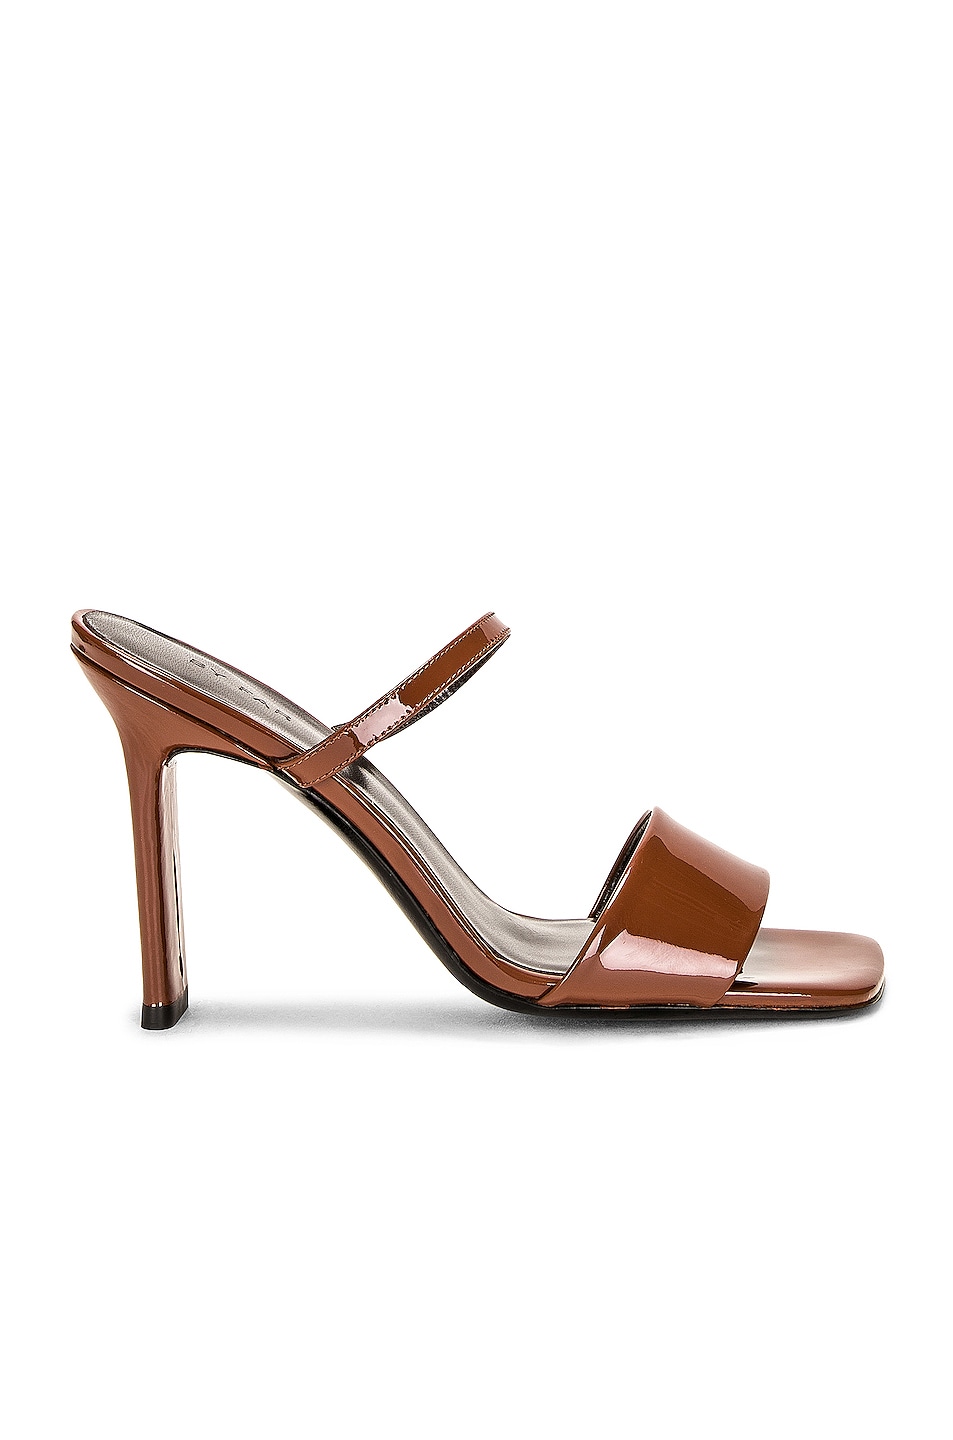 Image 1 of BY FAR Ada Heel in Chocolate